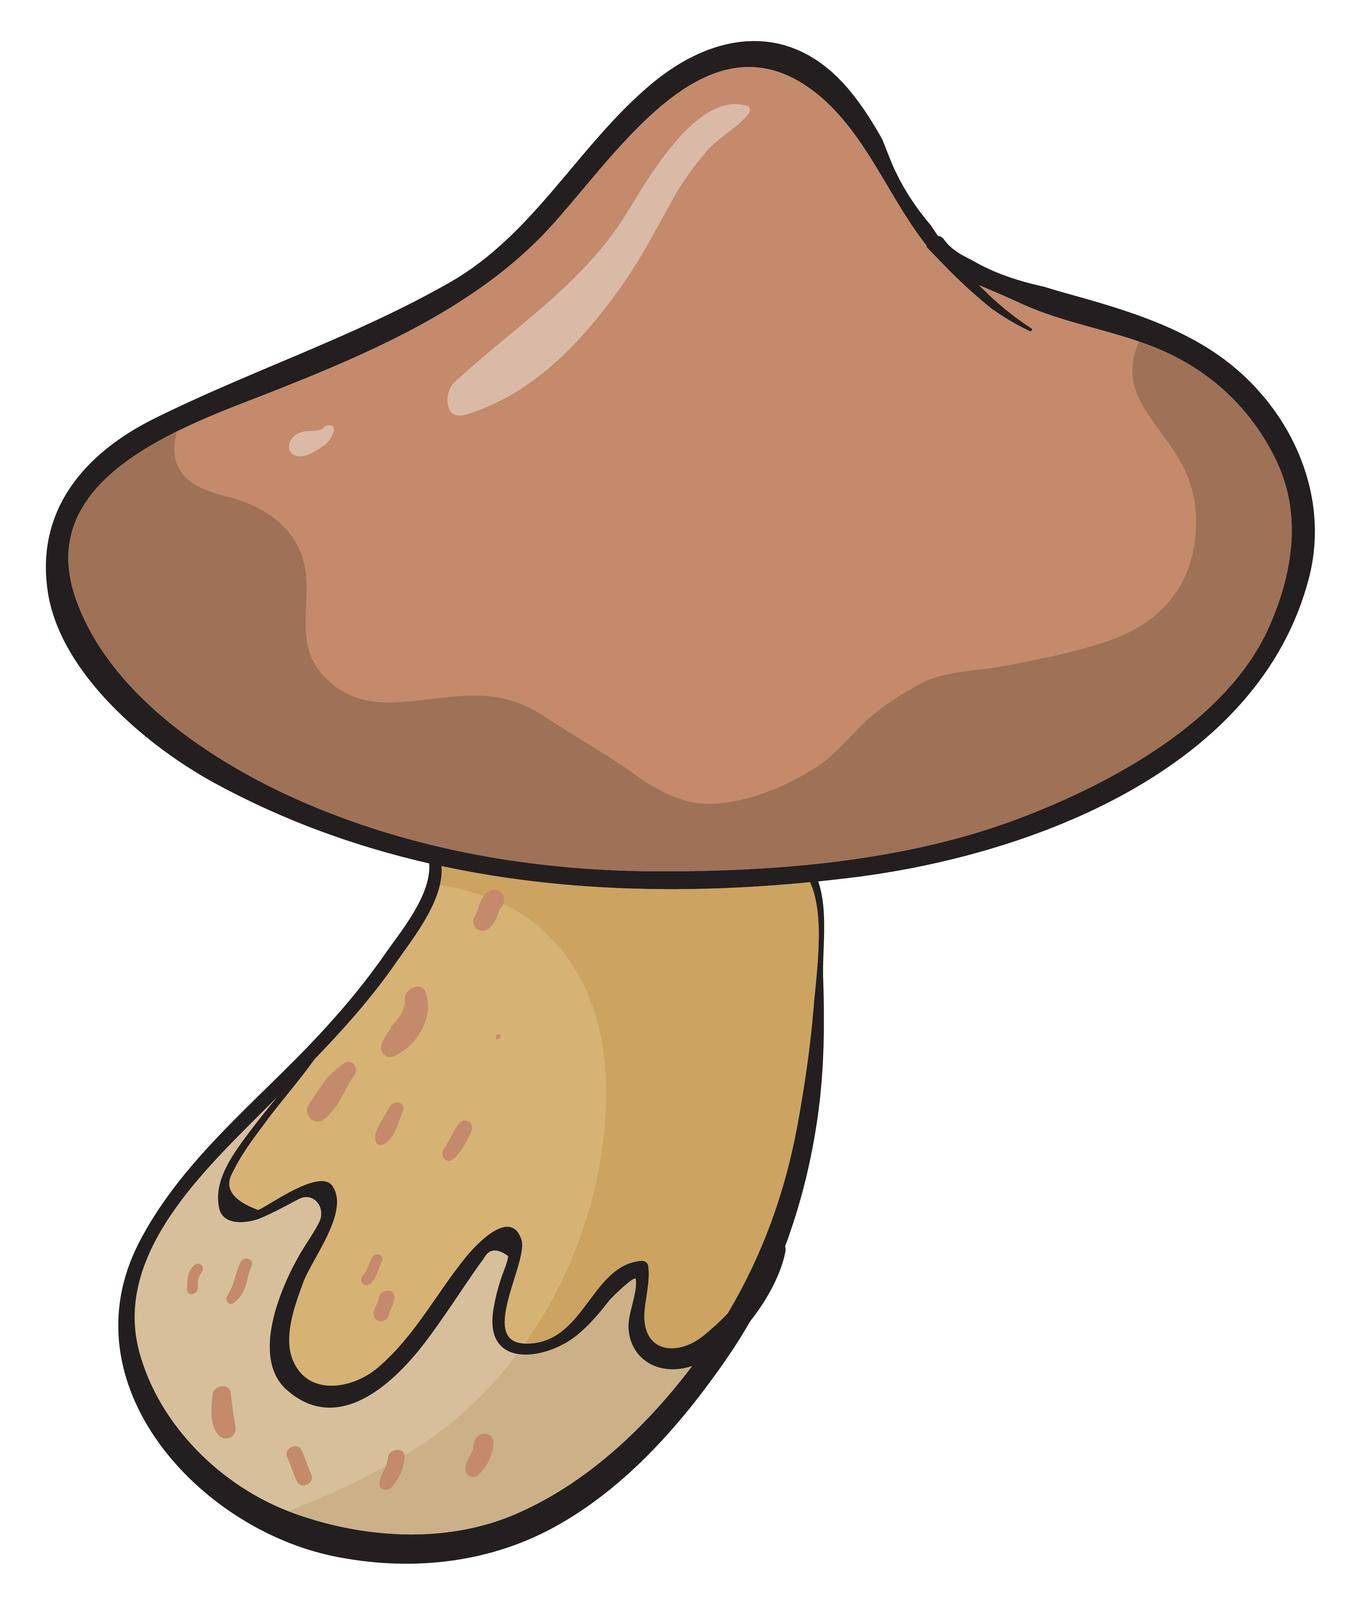 illustration of a mushroom on a white background